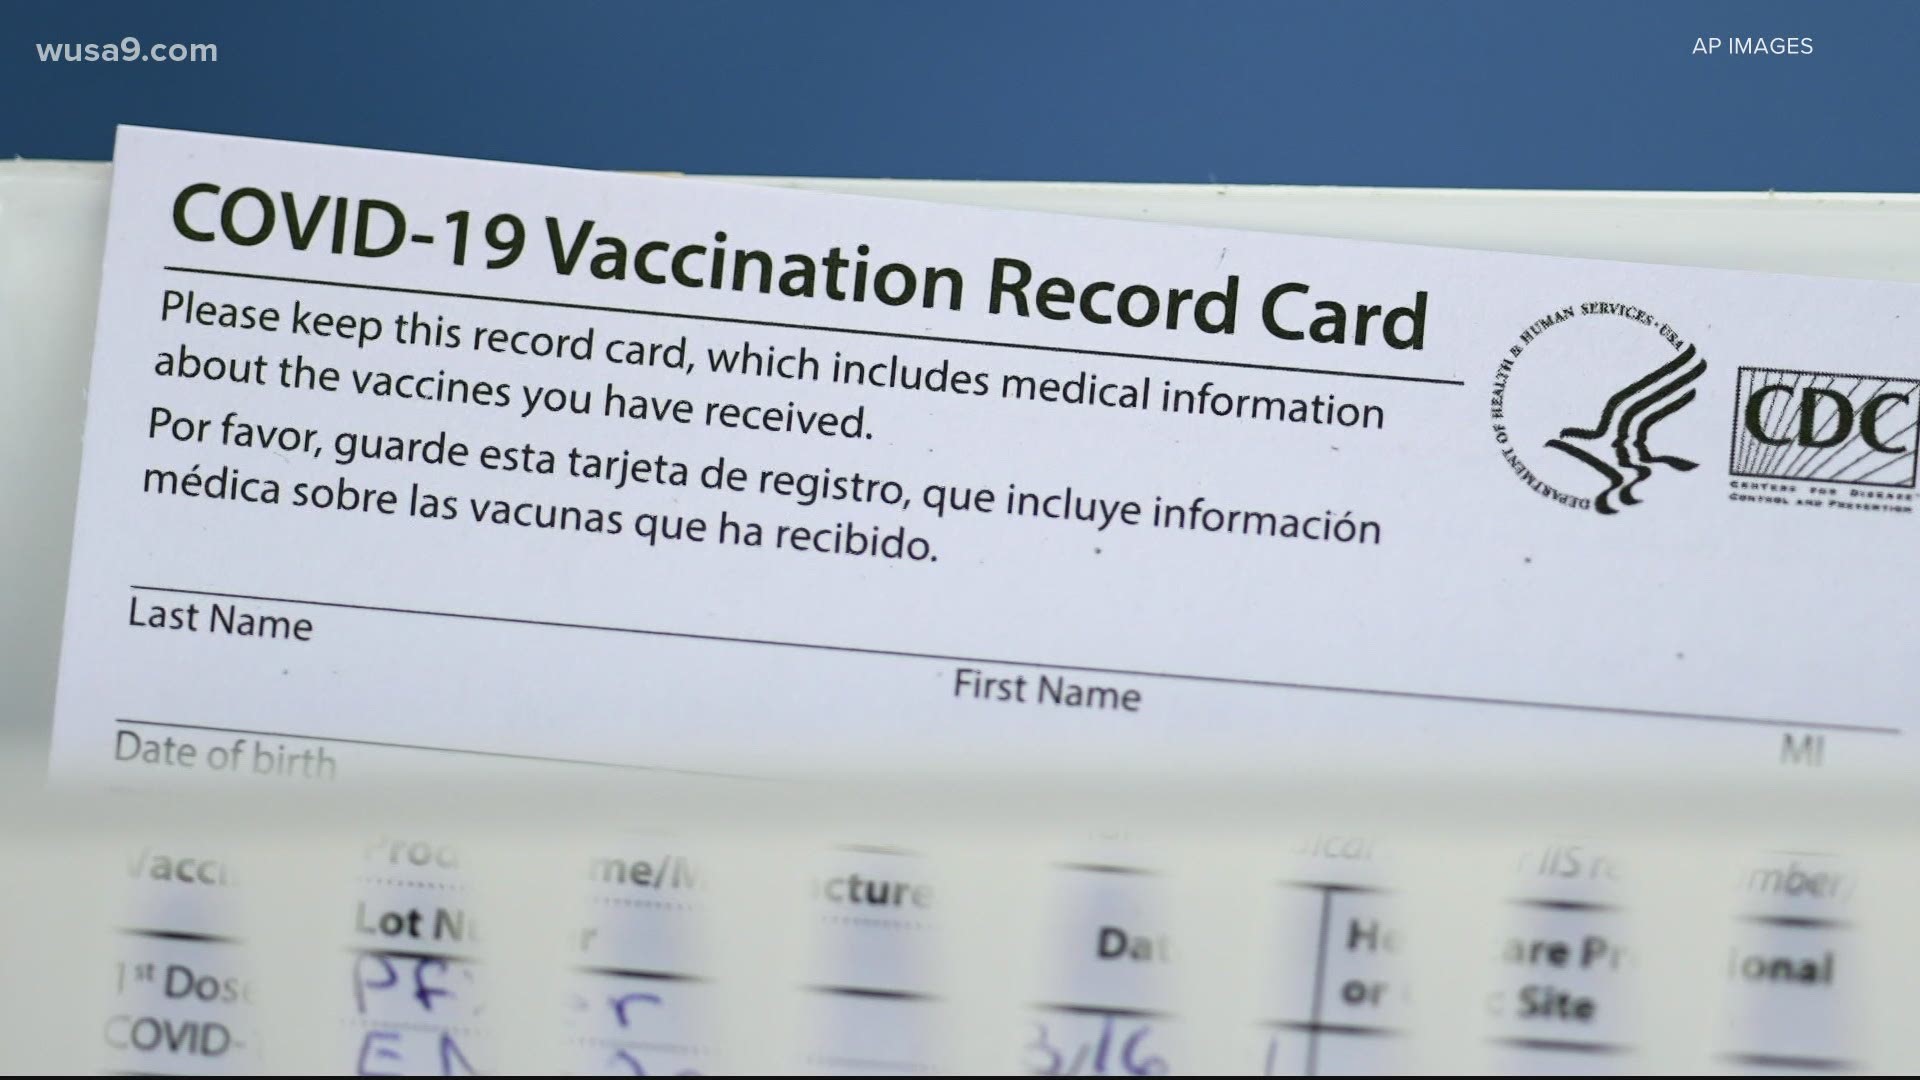 Some businesses have decided to require proof of vaccination for customers and employees. So what happens if you lost your card?